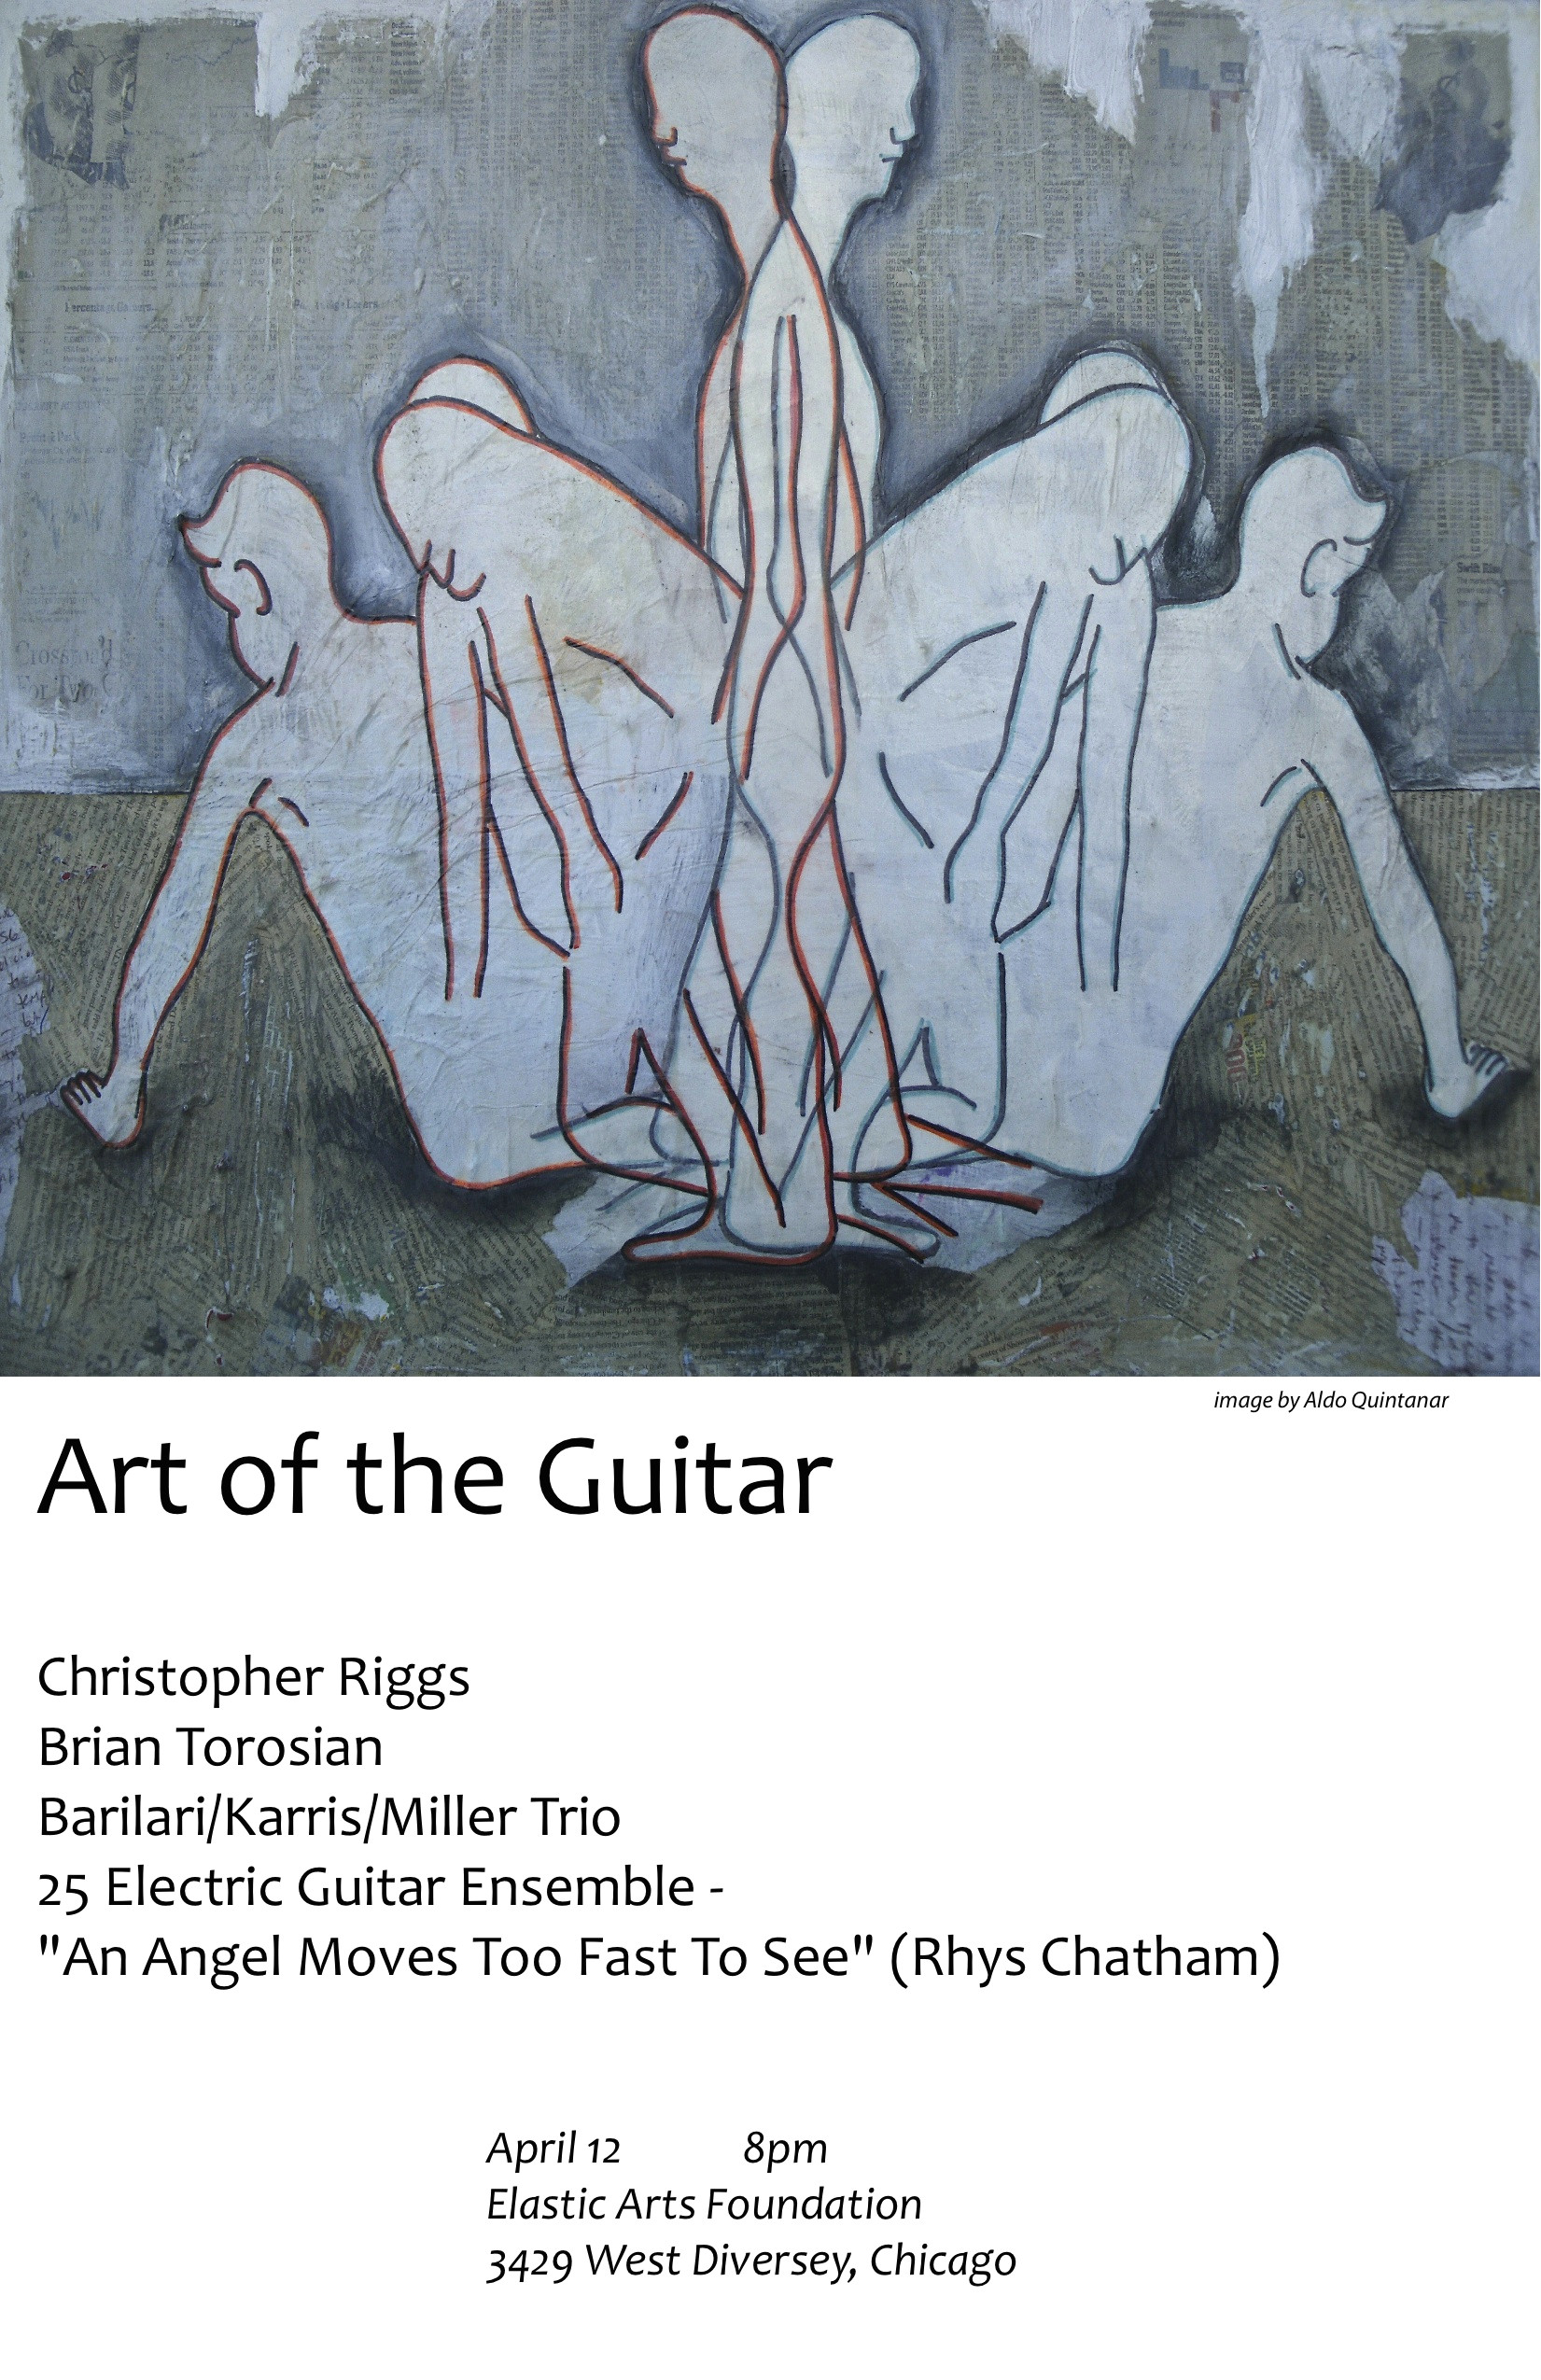 the art of the guitar concert series presented by julia a miller and articular facet are an outgrowth of an saic class which spans the history of the